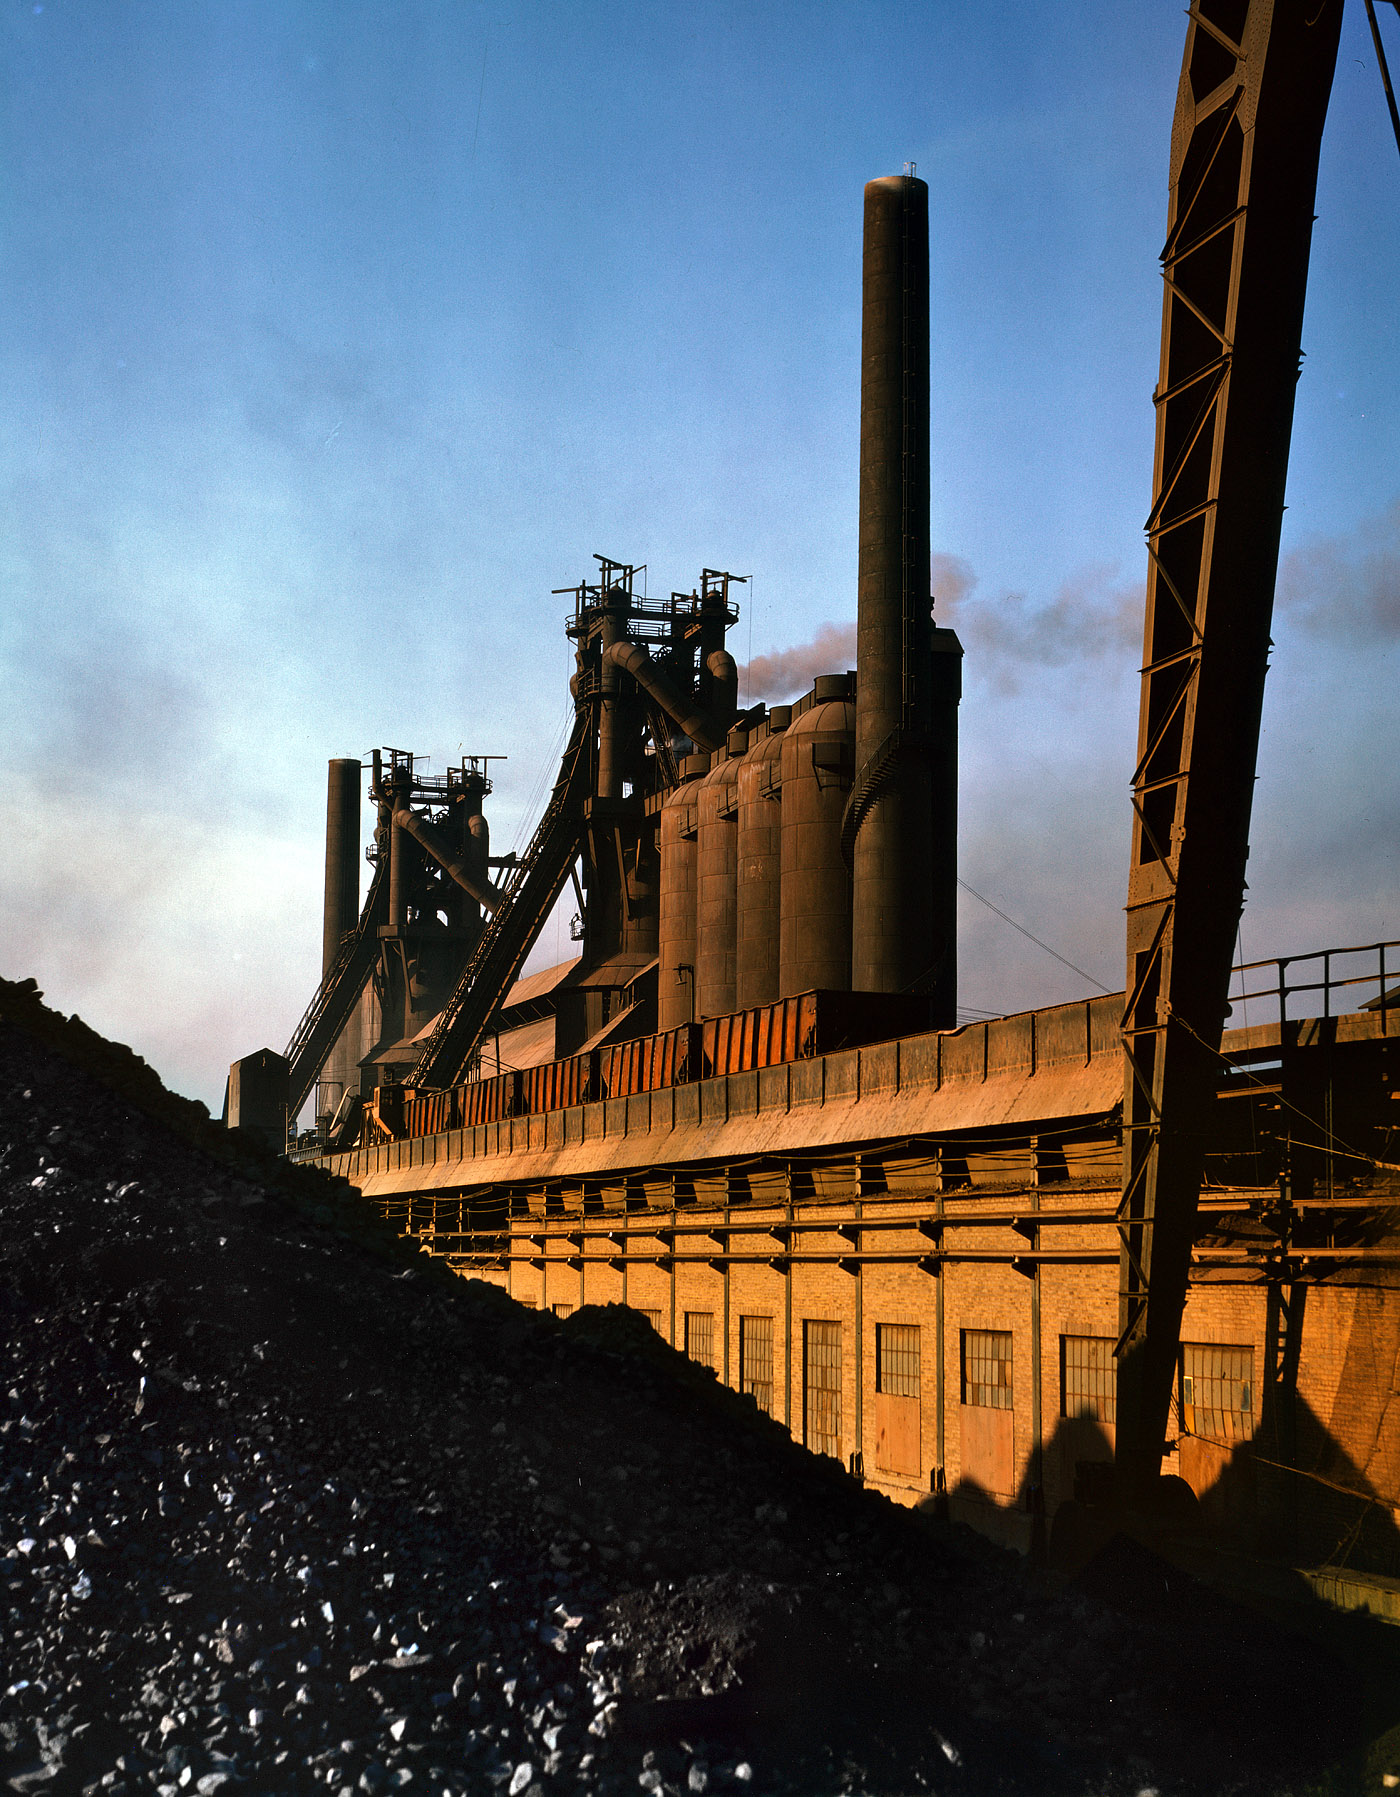 Nov. 1941. Etna, Pennsylvania. "Blast furnaces and ore at the Carnegie-Illinois Steel mills." View full size. 4x5 Kodachrome transparency by Alfred Palmer.